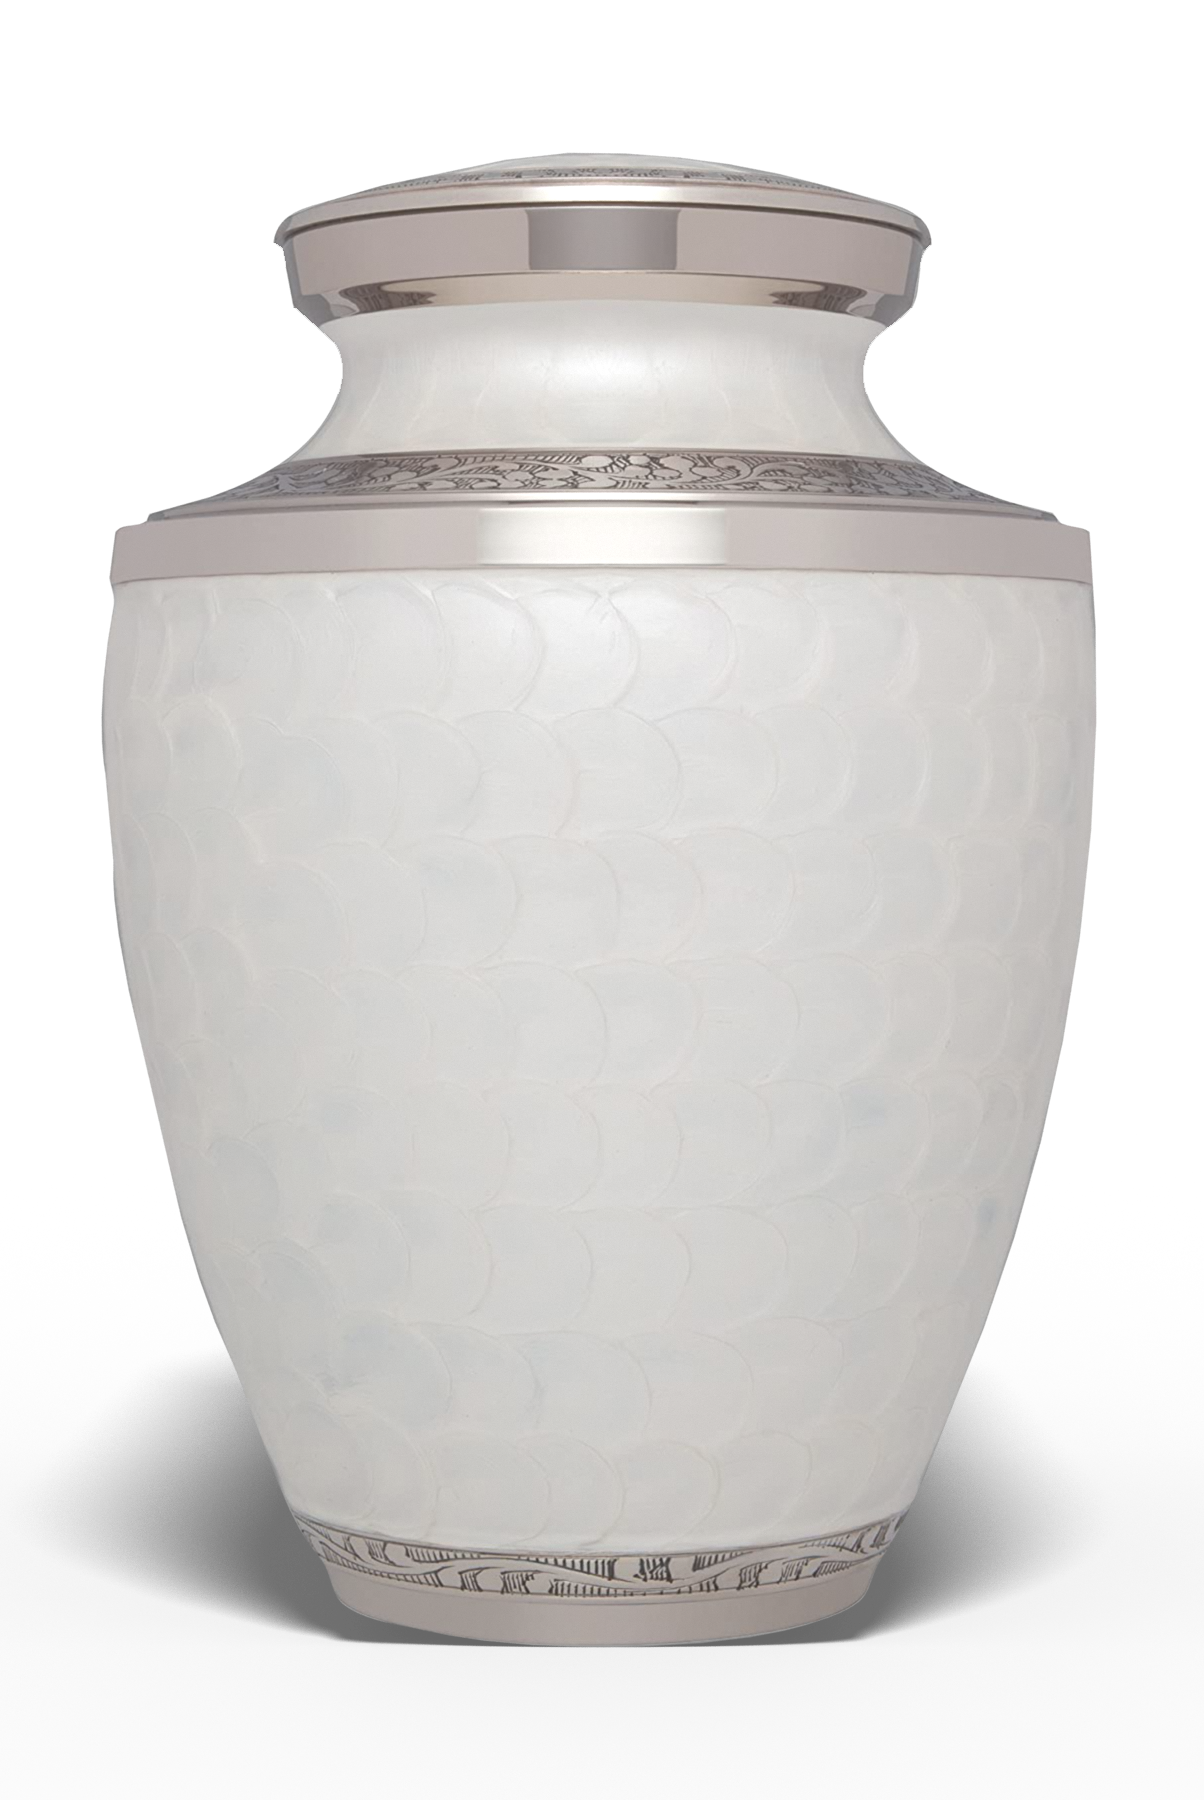 Viata Adult Ashes Urn-Adult Urn for Ashes-Cremation Urns- The cremation urns for ashes and keepsakes for ashes come in a variety of styles to suit most tastes, decor and different volumes of funeral ashes.